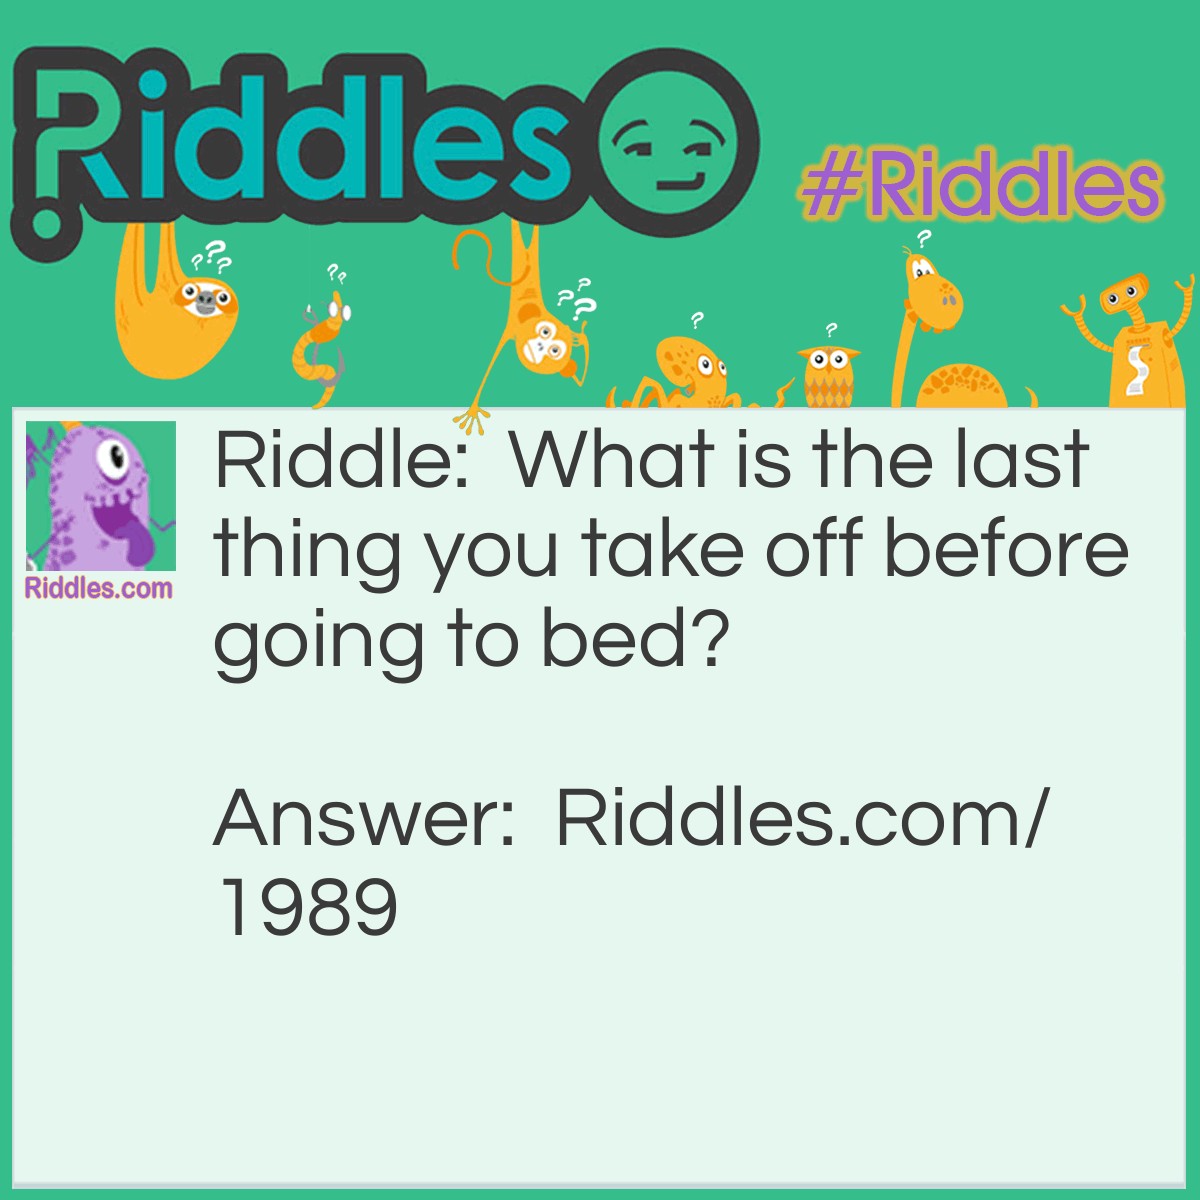 Riddle: What is the last thing you take off before going to bed? Answer: Your feet from the floor.